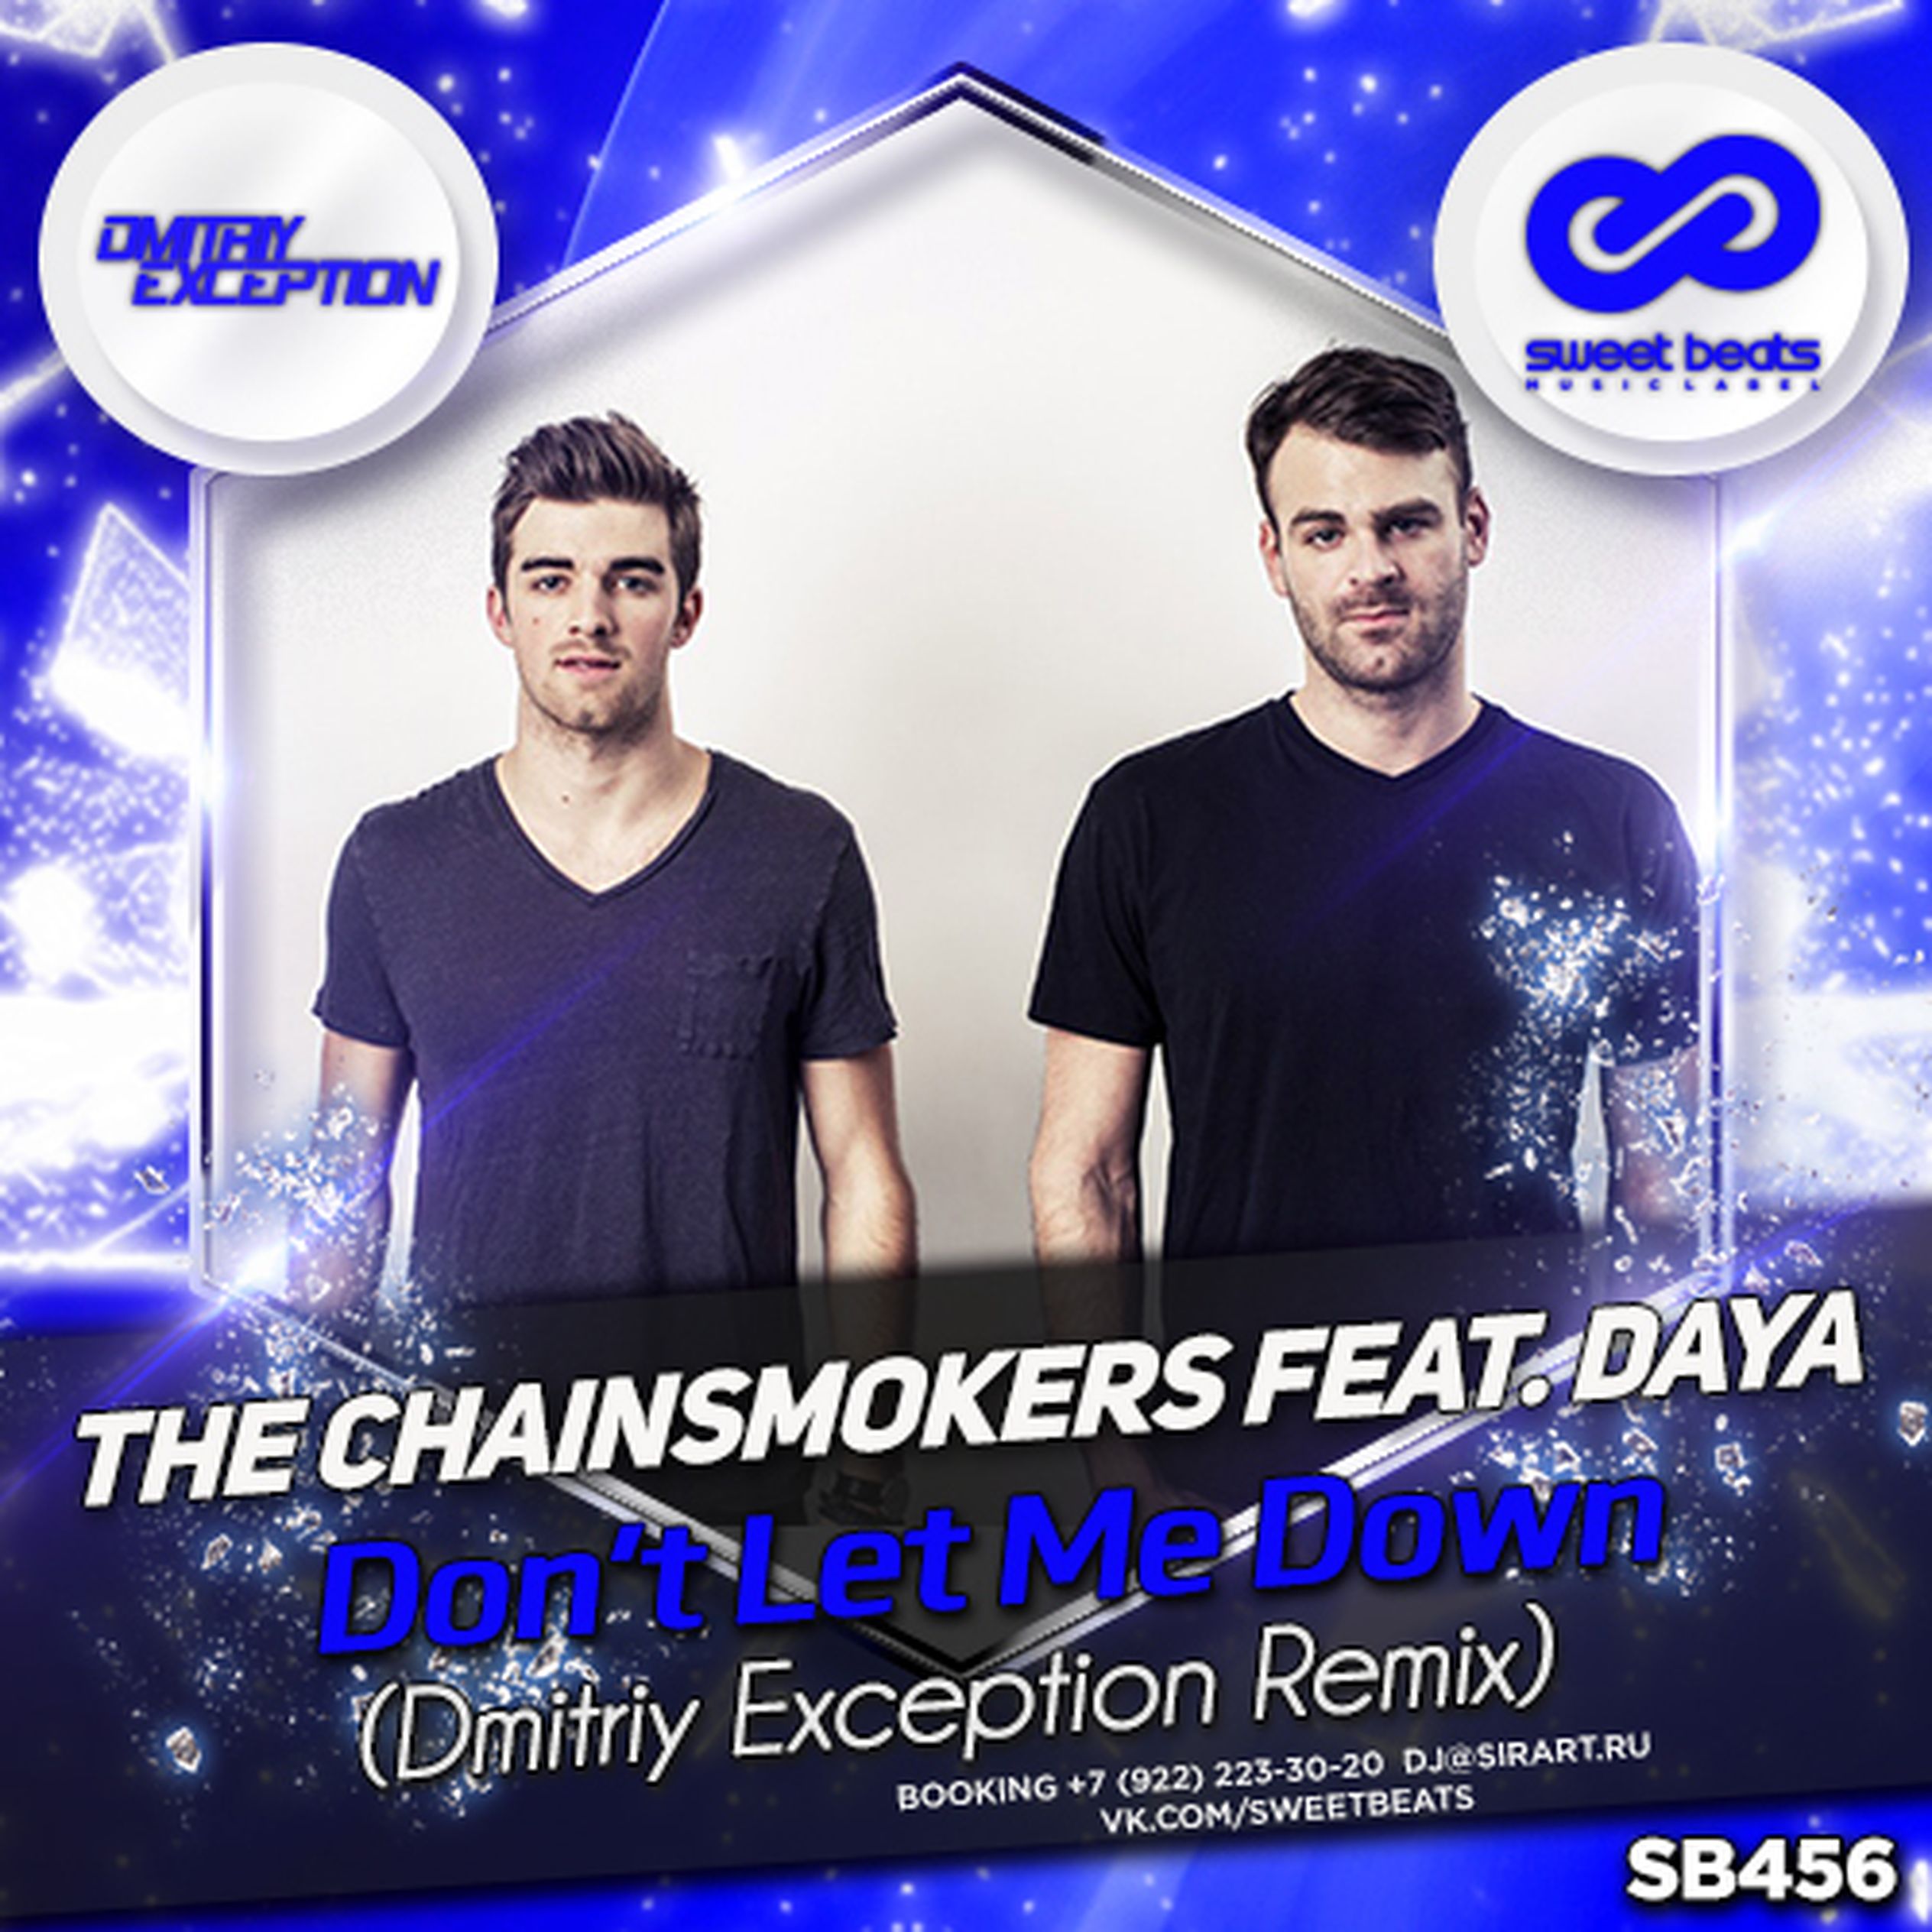 Фото the Chainsmokers don. My Bad the Chainsmokers. Грибы, Dmitriy exception & ton don - велик (DJ Raptor, DJ tima Mash up). THE+CHAINSMOKERS+FEAT.+DAYA DJ JOUNCE+DON%27T+LET+ME+DOWN REMIX BACKSTAGE. The chainsmokers feat daya